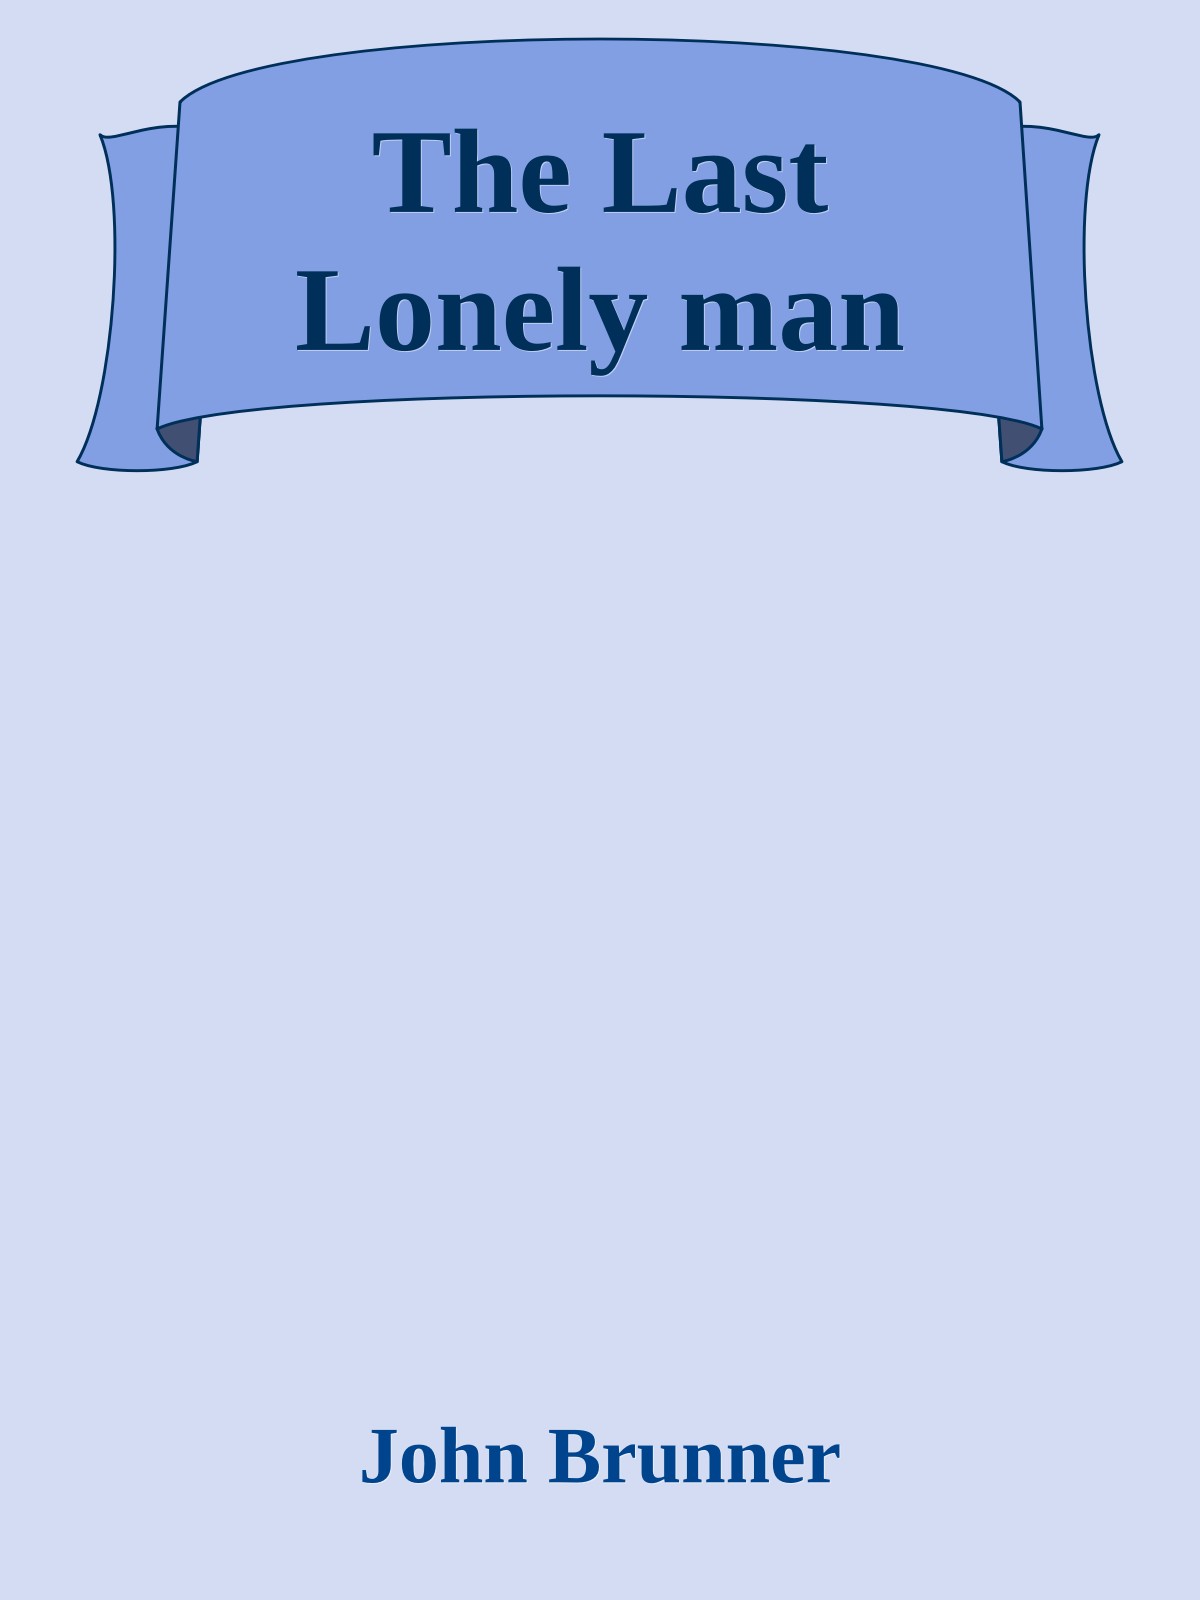 The Last Lonely man